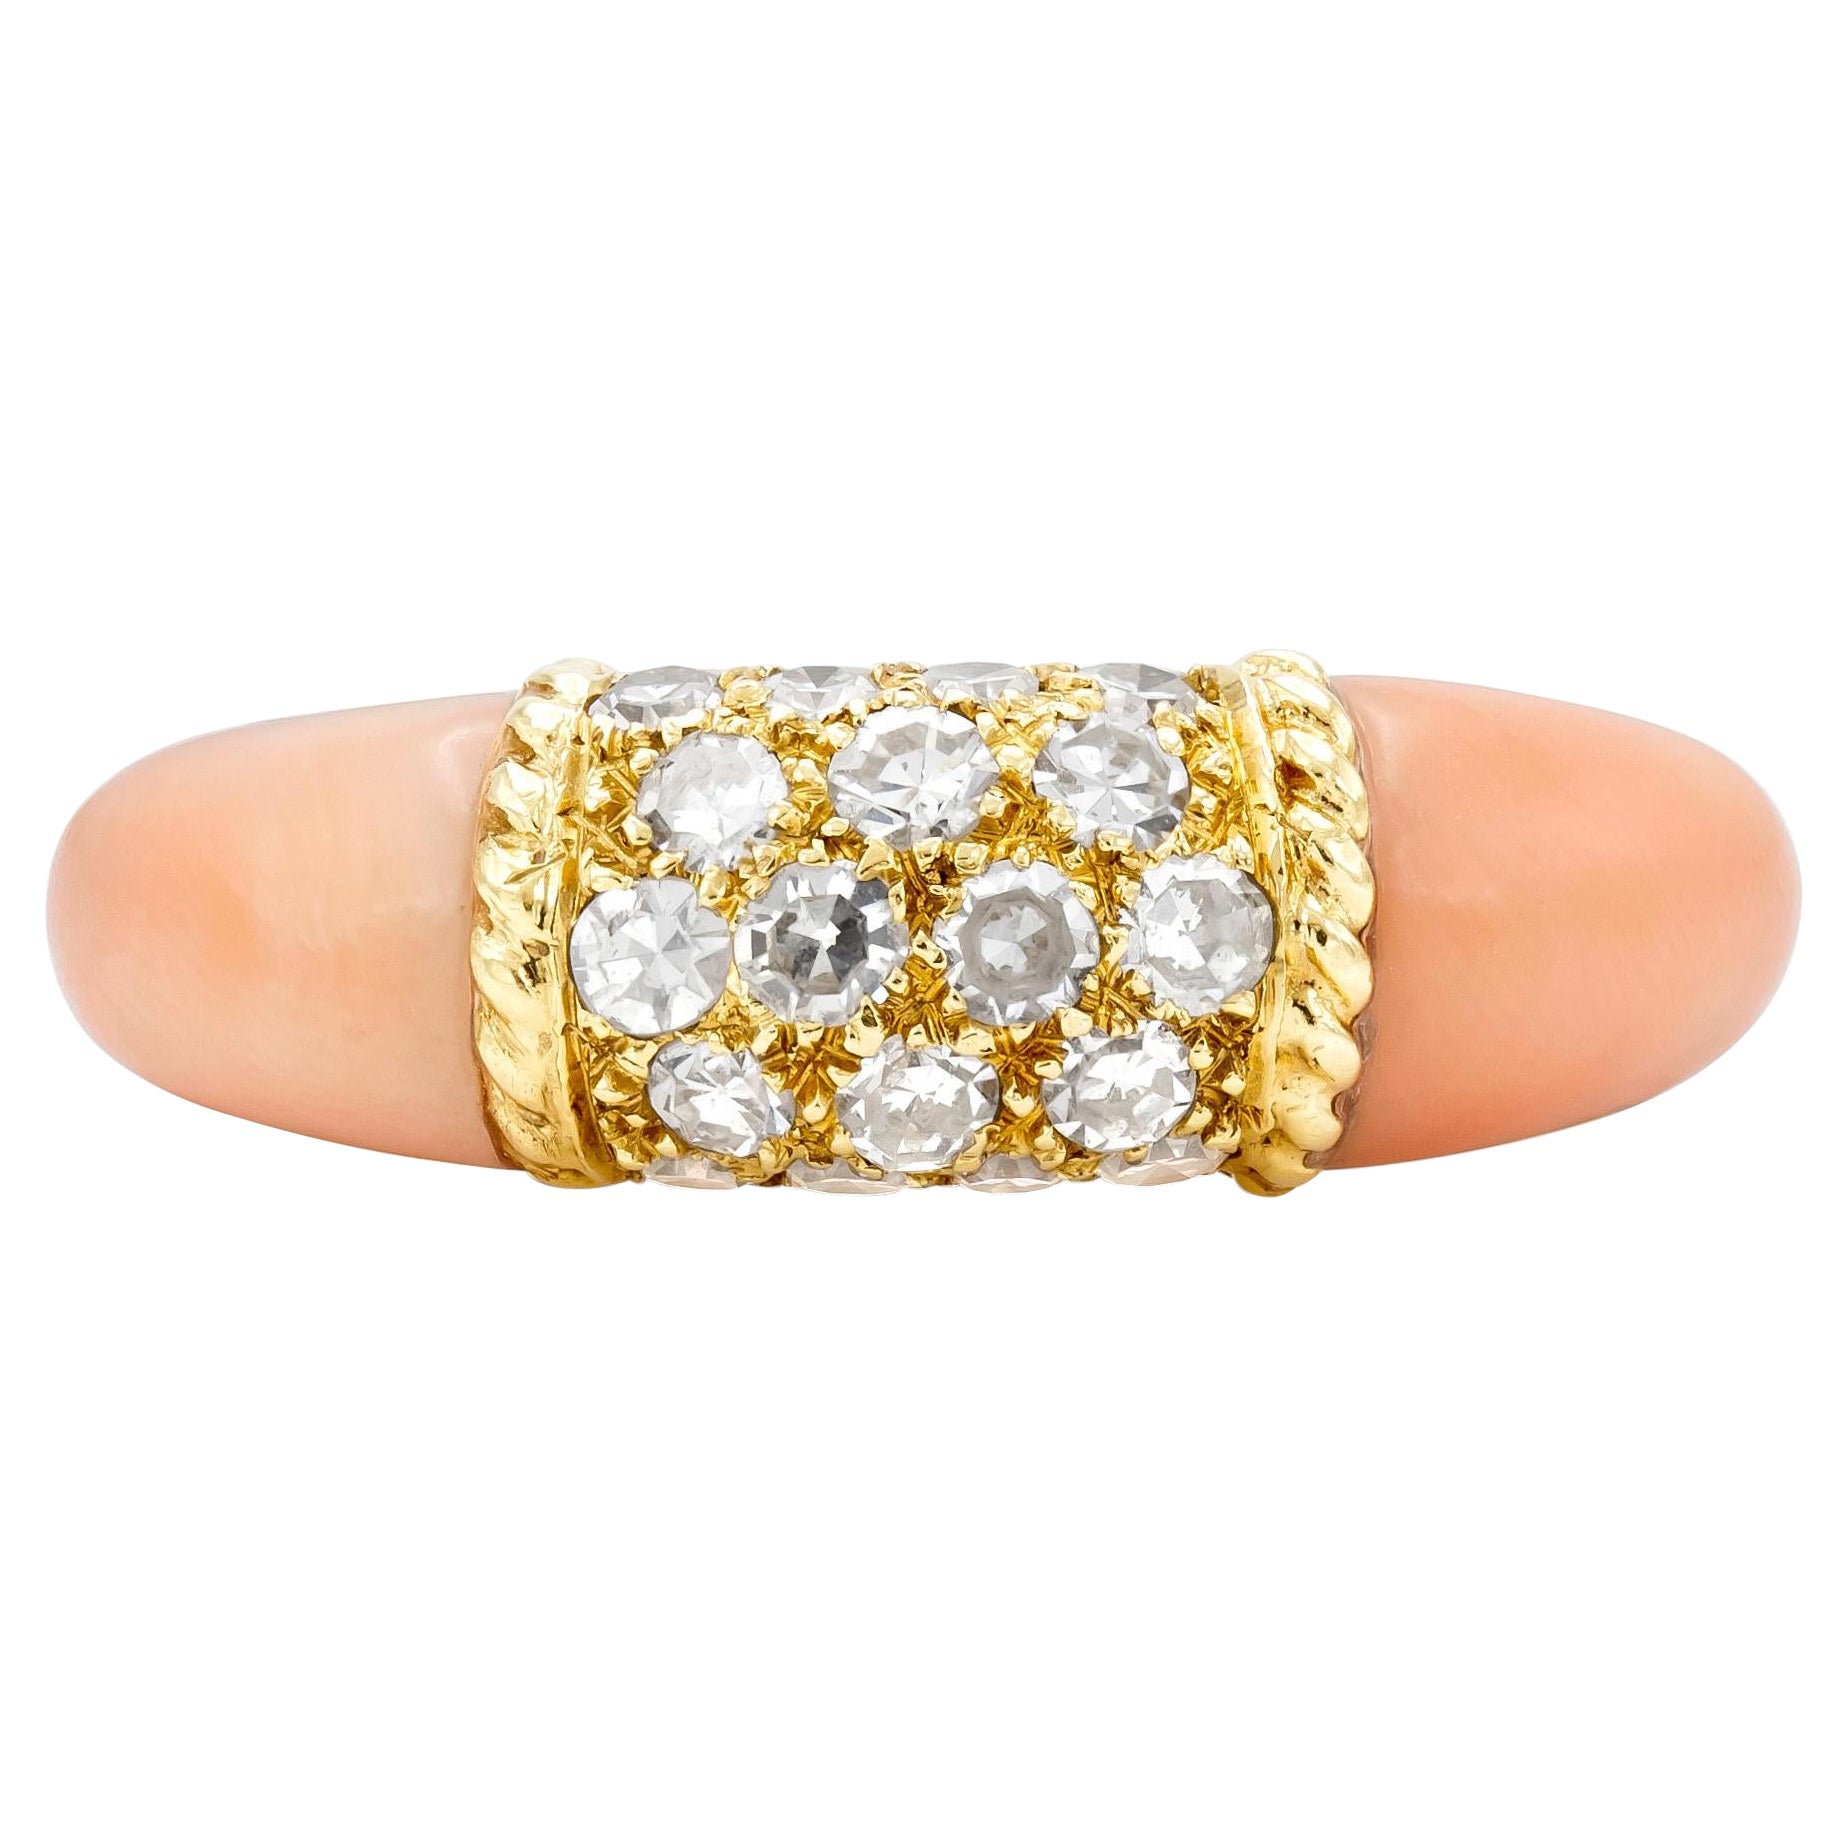 Van Cleef & Arpels Philippine Ring in Coral and Diamonds